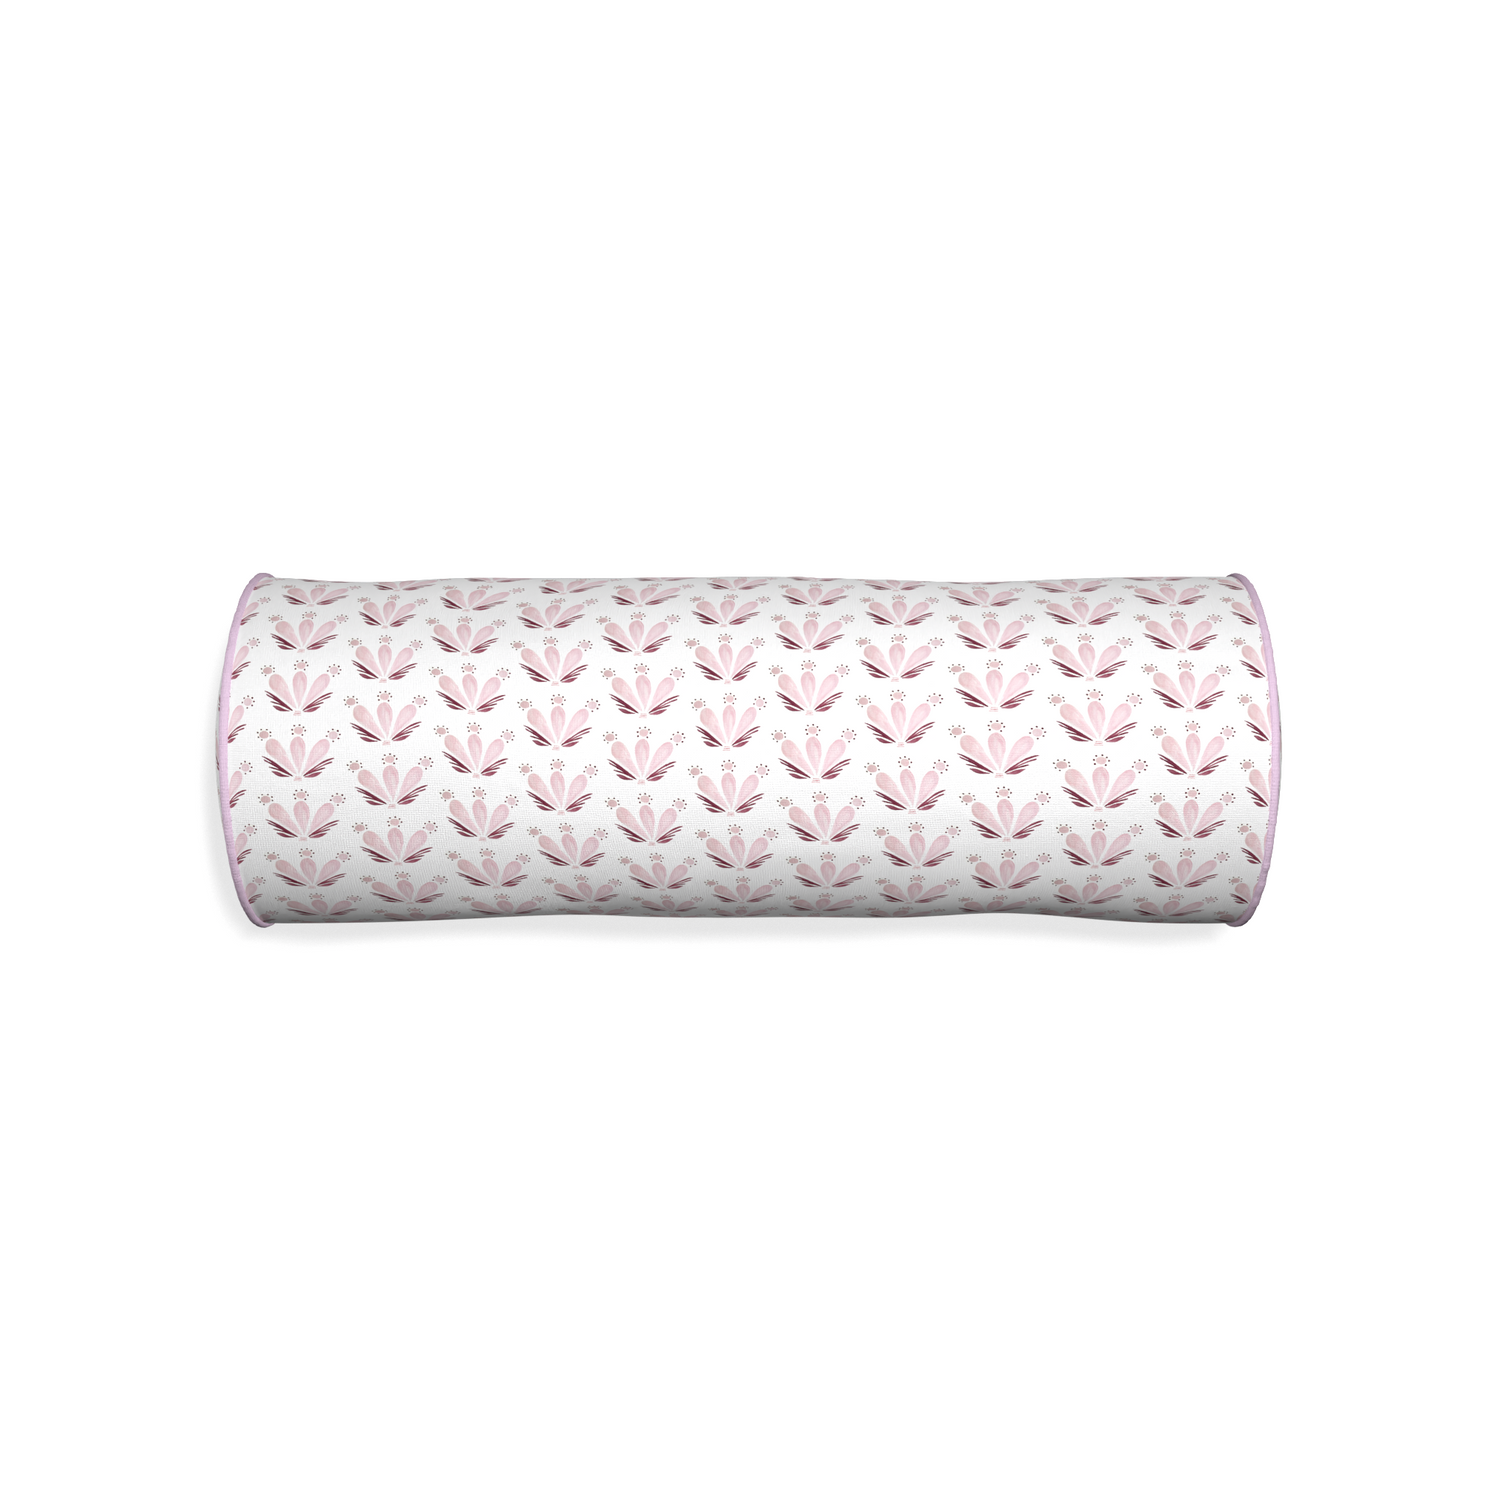 Bolster serena pink custom pink & burgundy drop repeat floralpillow with l piping on white background